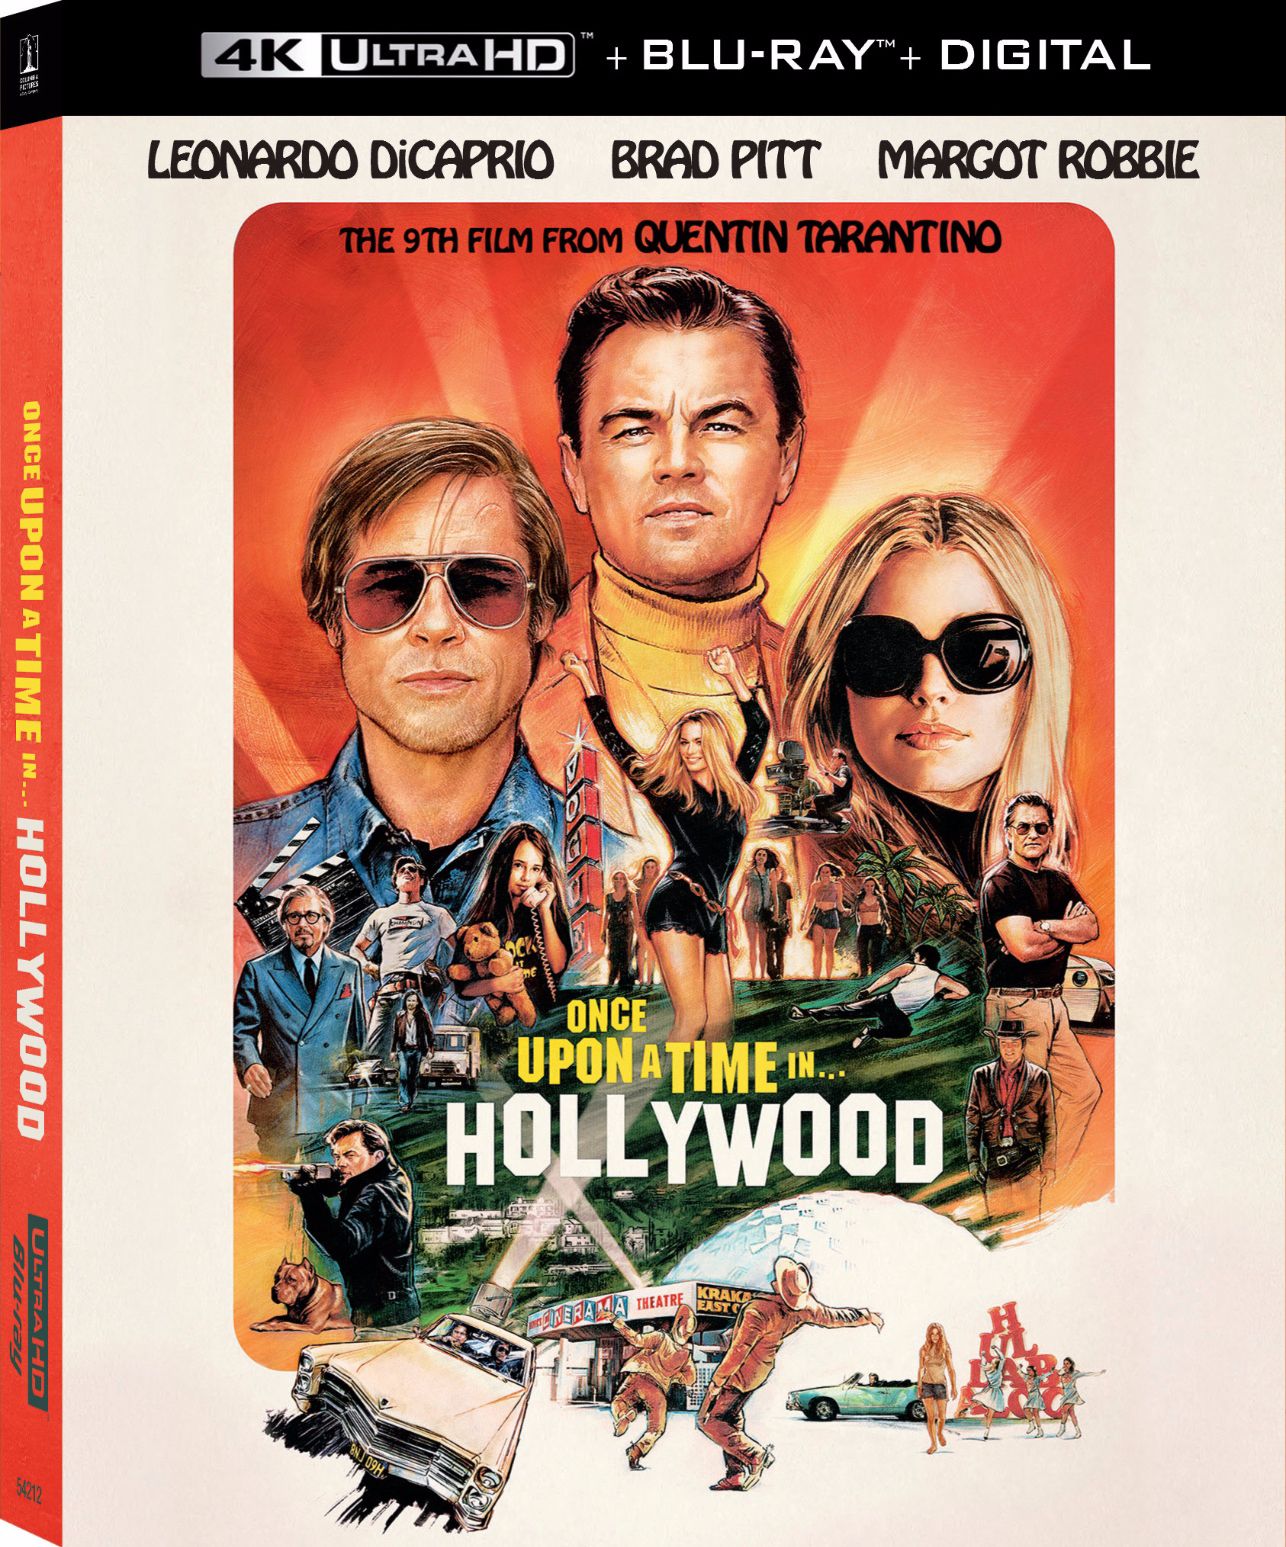 Once Upon a Time in Hollywood 4K Collector's Edition Art